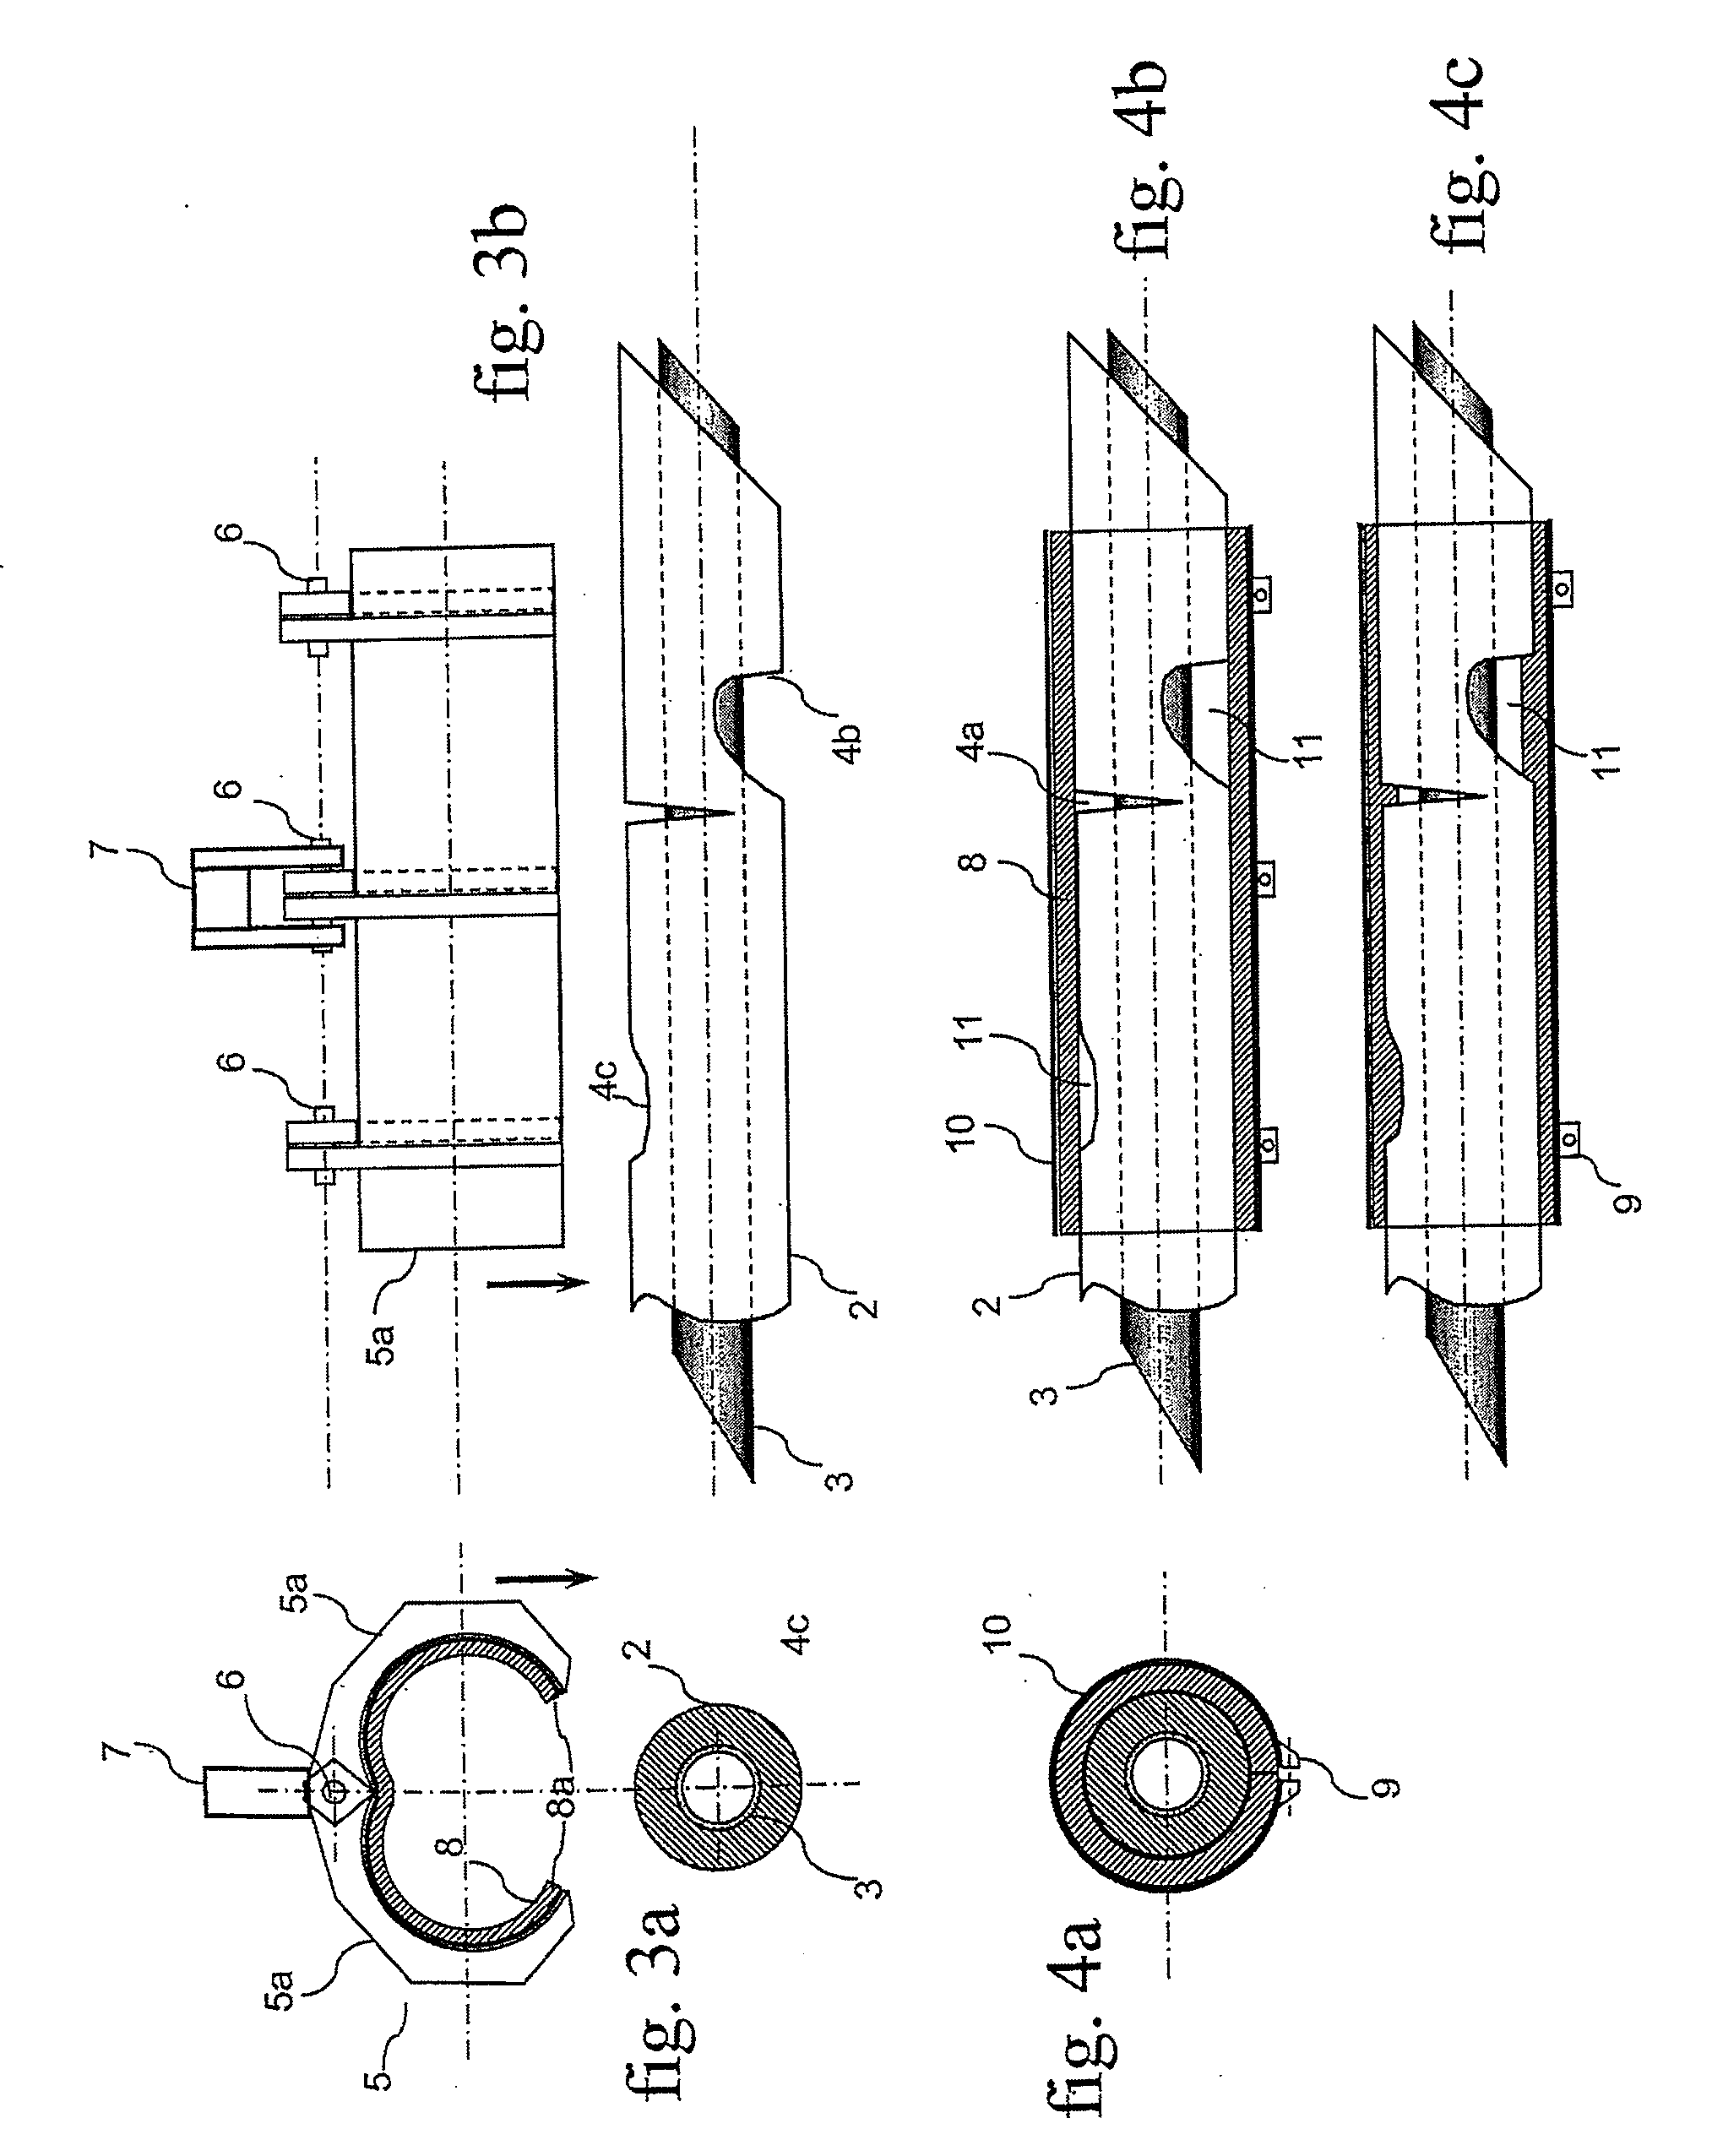 Device for Restoring or for Installing the Thermally Insulating External Jacket of Pipes, Tubes, Hoses, Connection Elements and Other Jacketed Elements